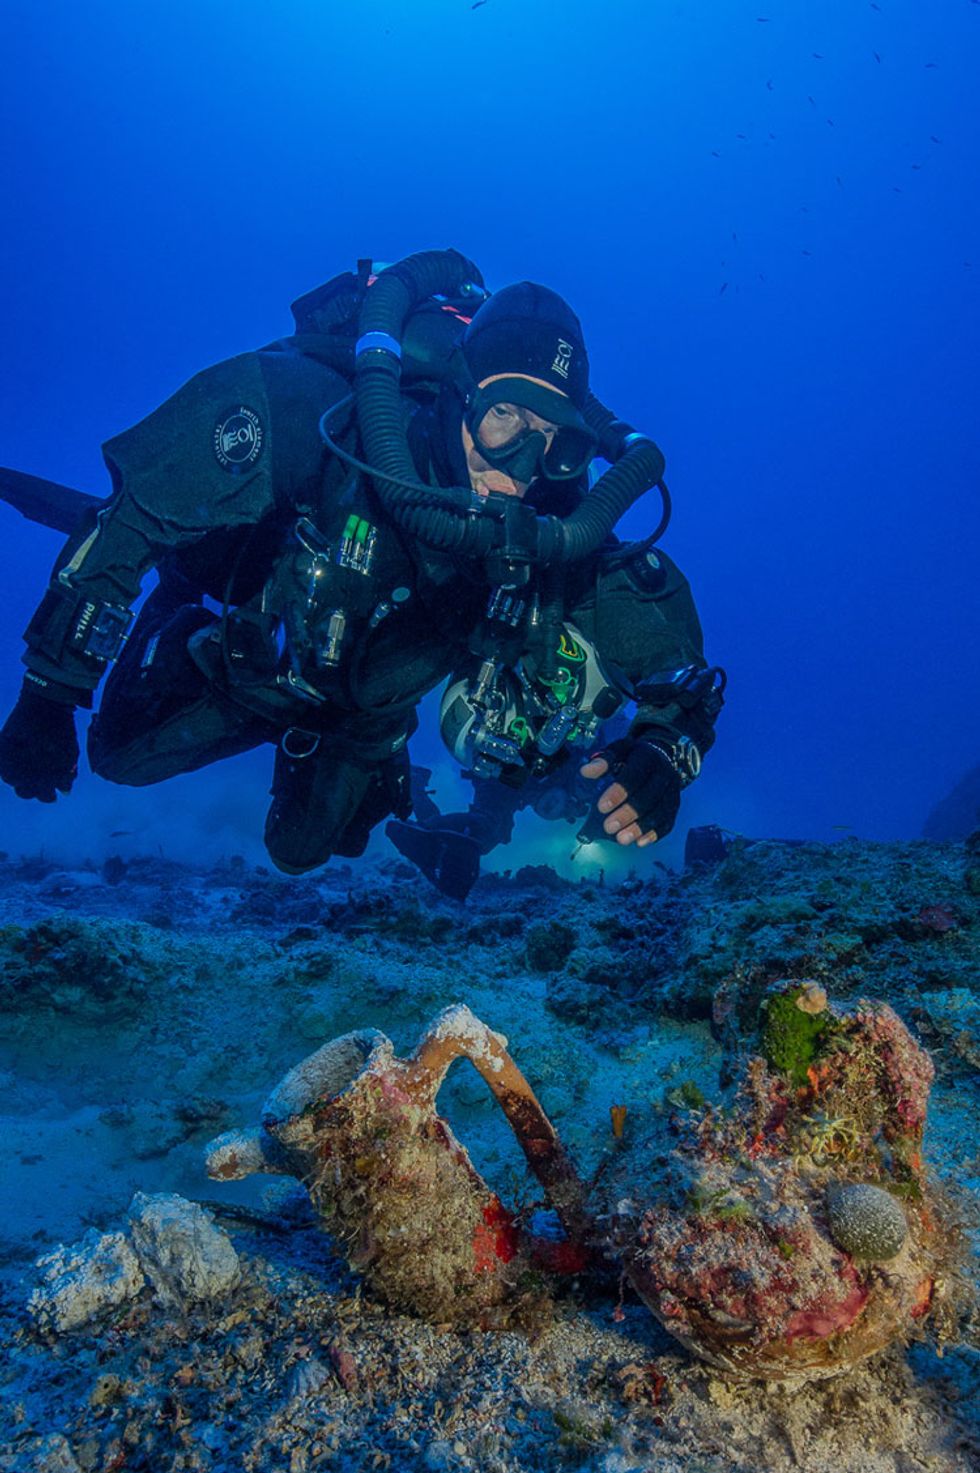 Artifacts Recovered From Over 2,000-Year-Old Shipwreck Reveal 'How the 1 Percent Lived in the Time of Caesar